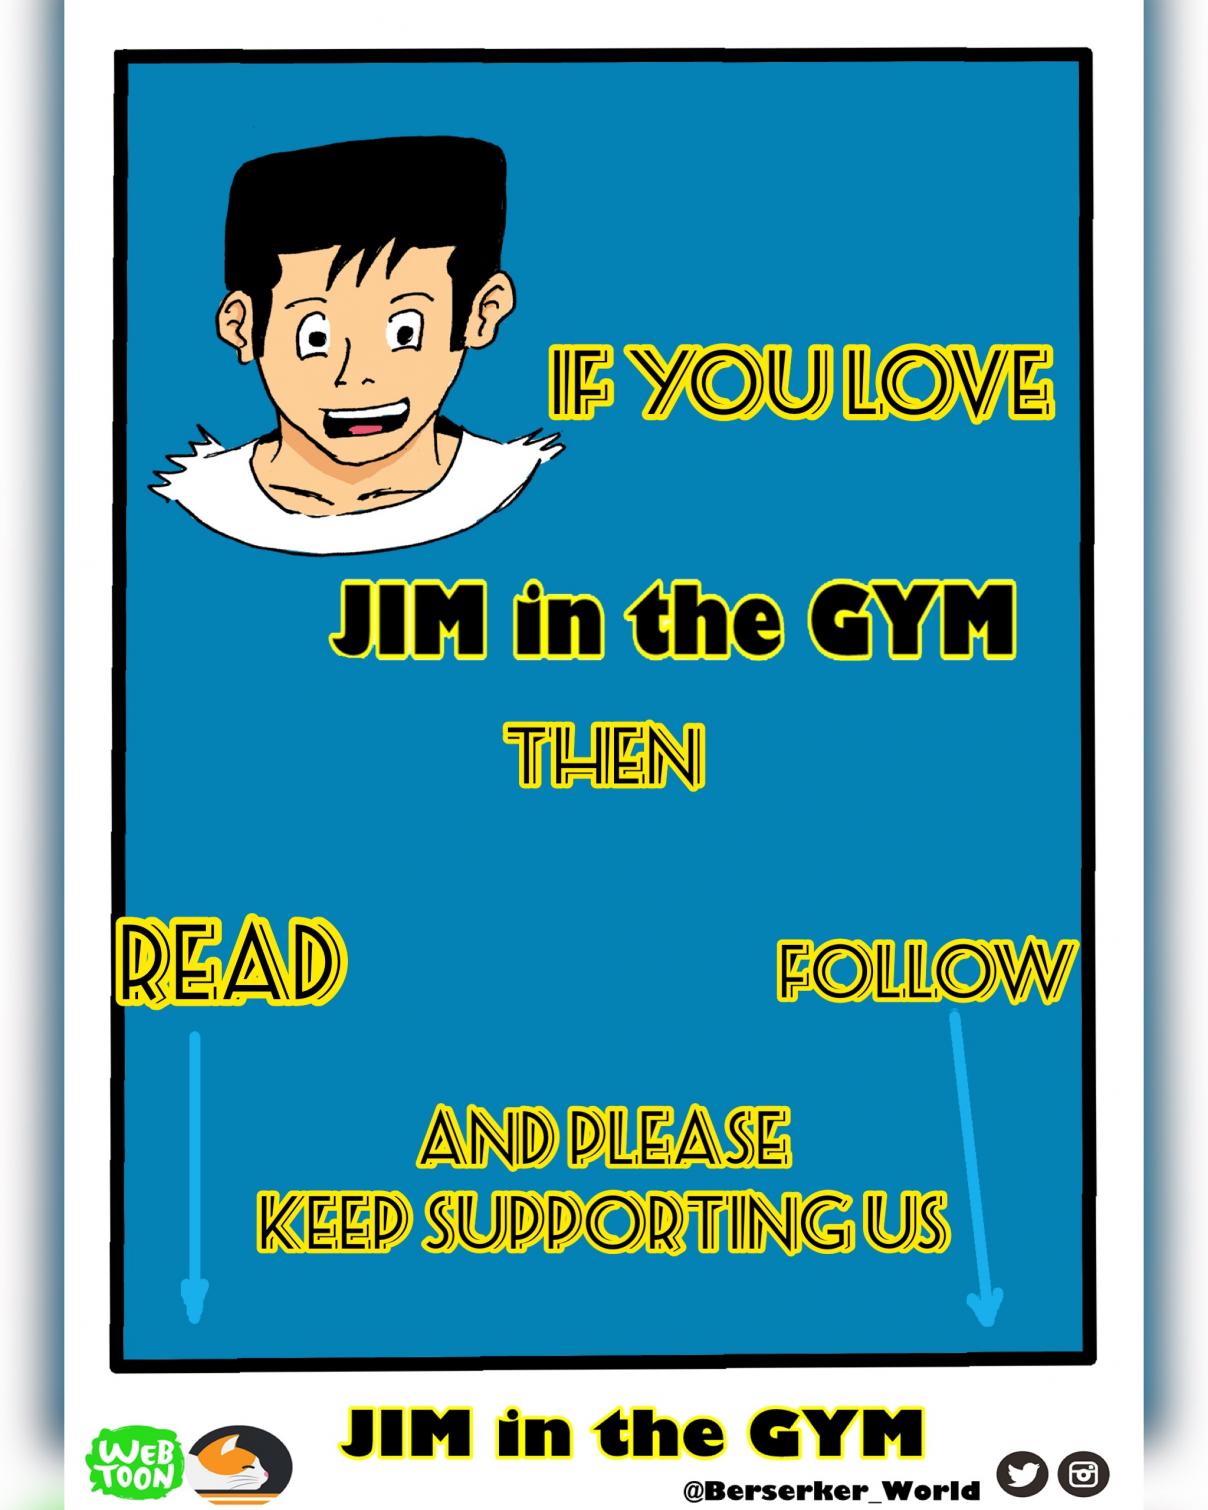 Jim in the Gym Vol. 1 Ch. 14.1 Friday Q&A